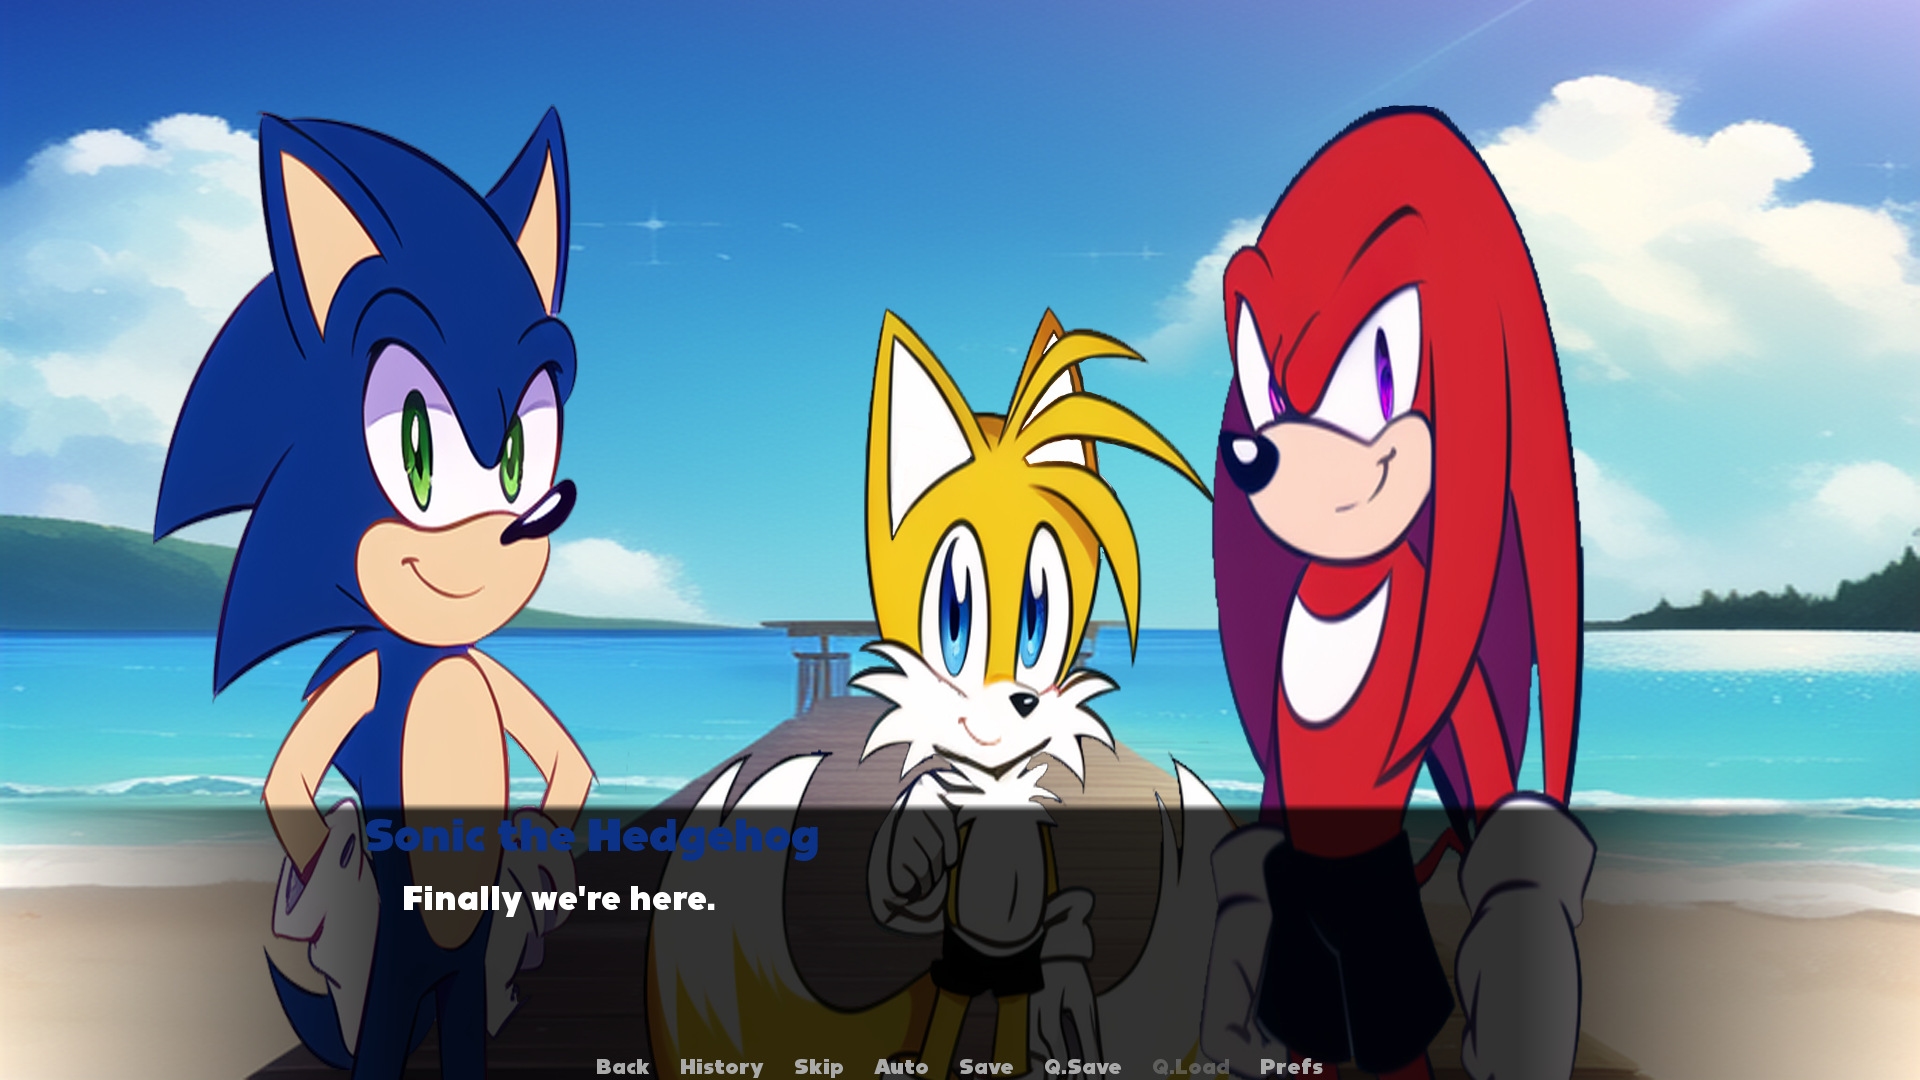 Sonic.EXE:The Game - free porn game download, adult nsfw games for free 